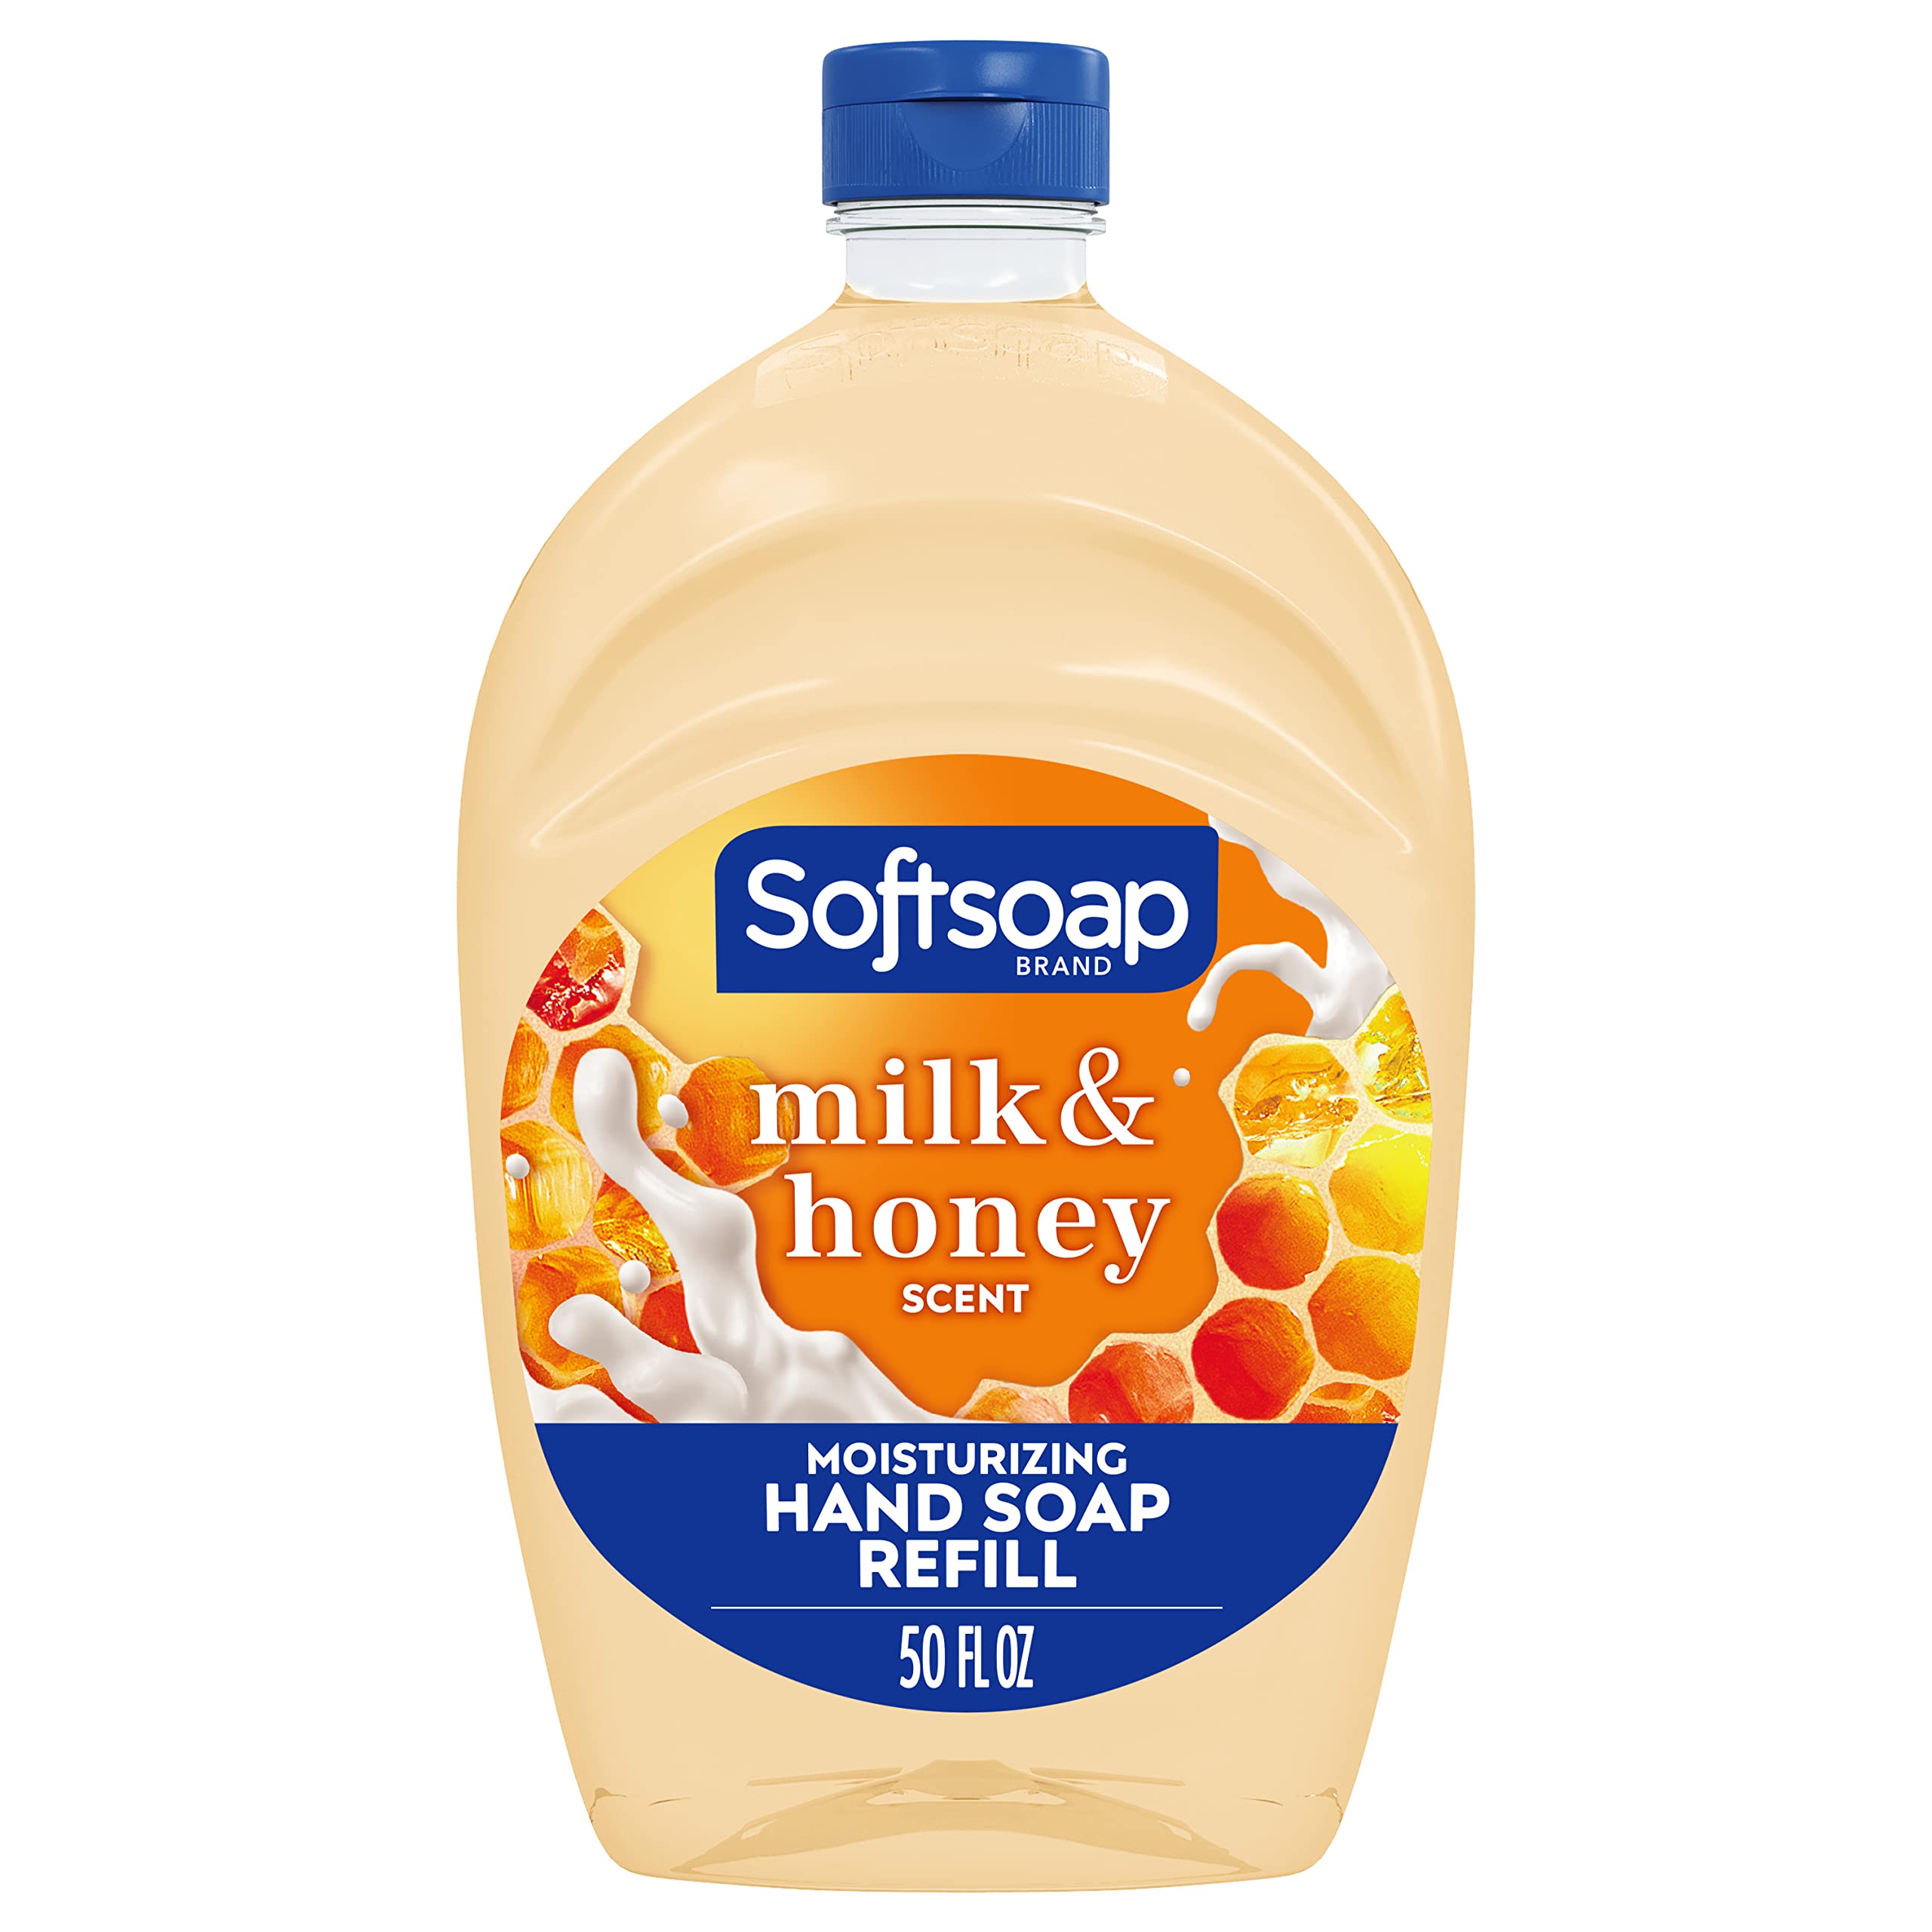 50-Oz Softsoap Liquid Hand Soap Refill (Milk & Honey) $4.79 + Free Shipping w/ Prime or on orders over $25